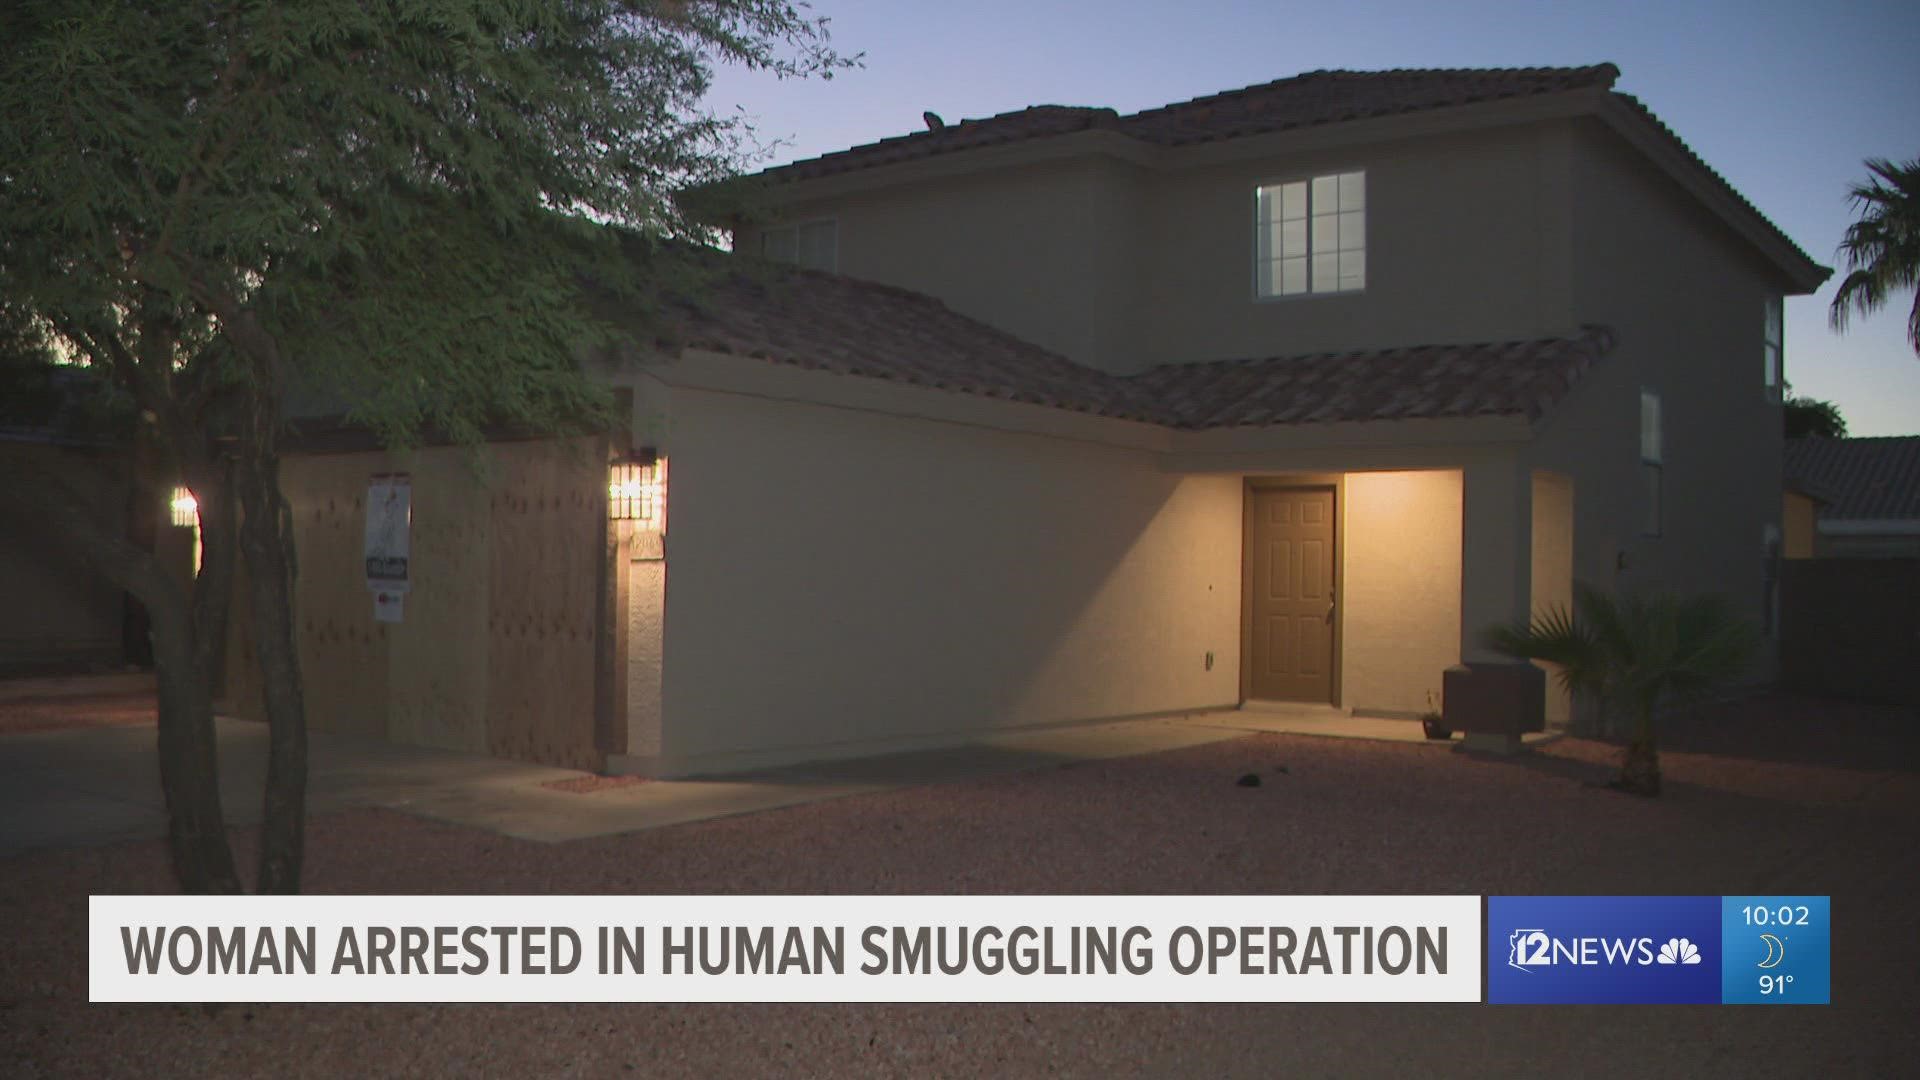 El Mirage police learned that 80 to 100 undocumented immigrants were being held and processed in the home monthly for at least six months.